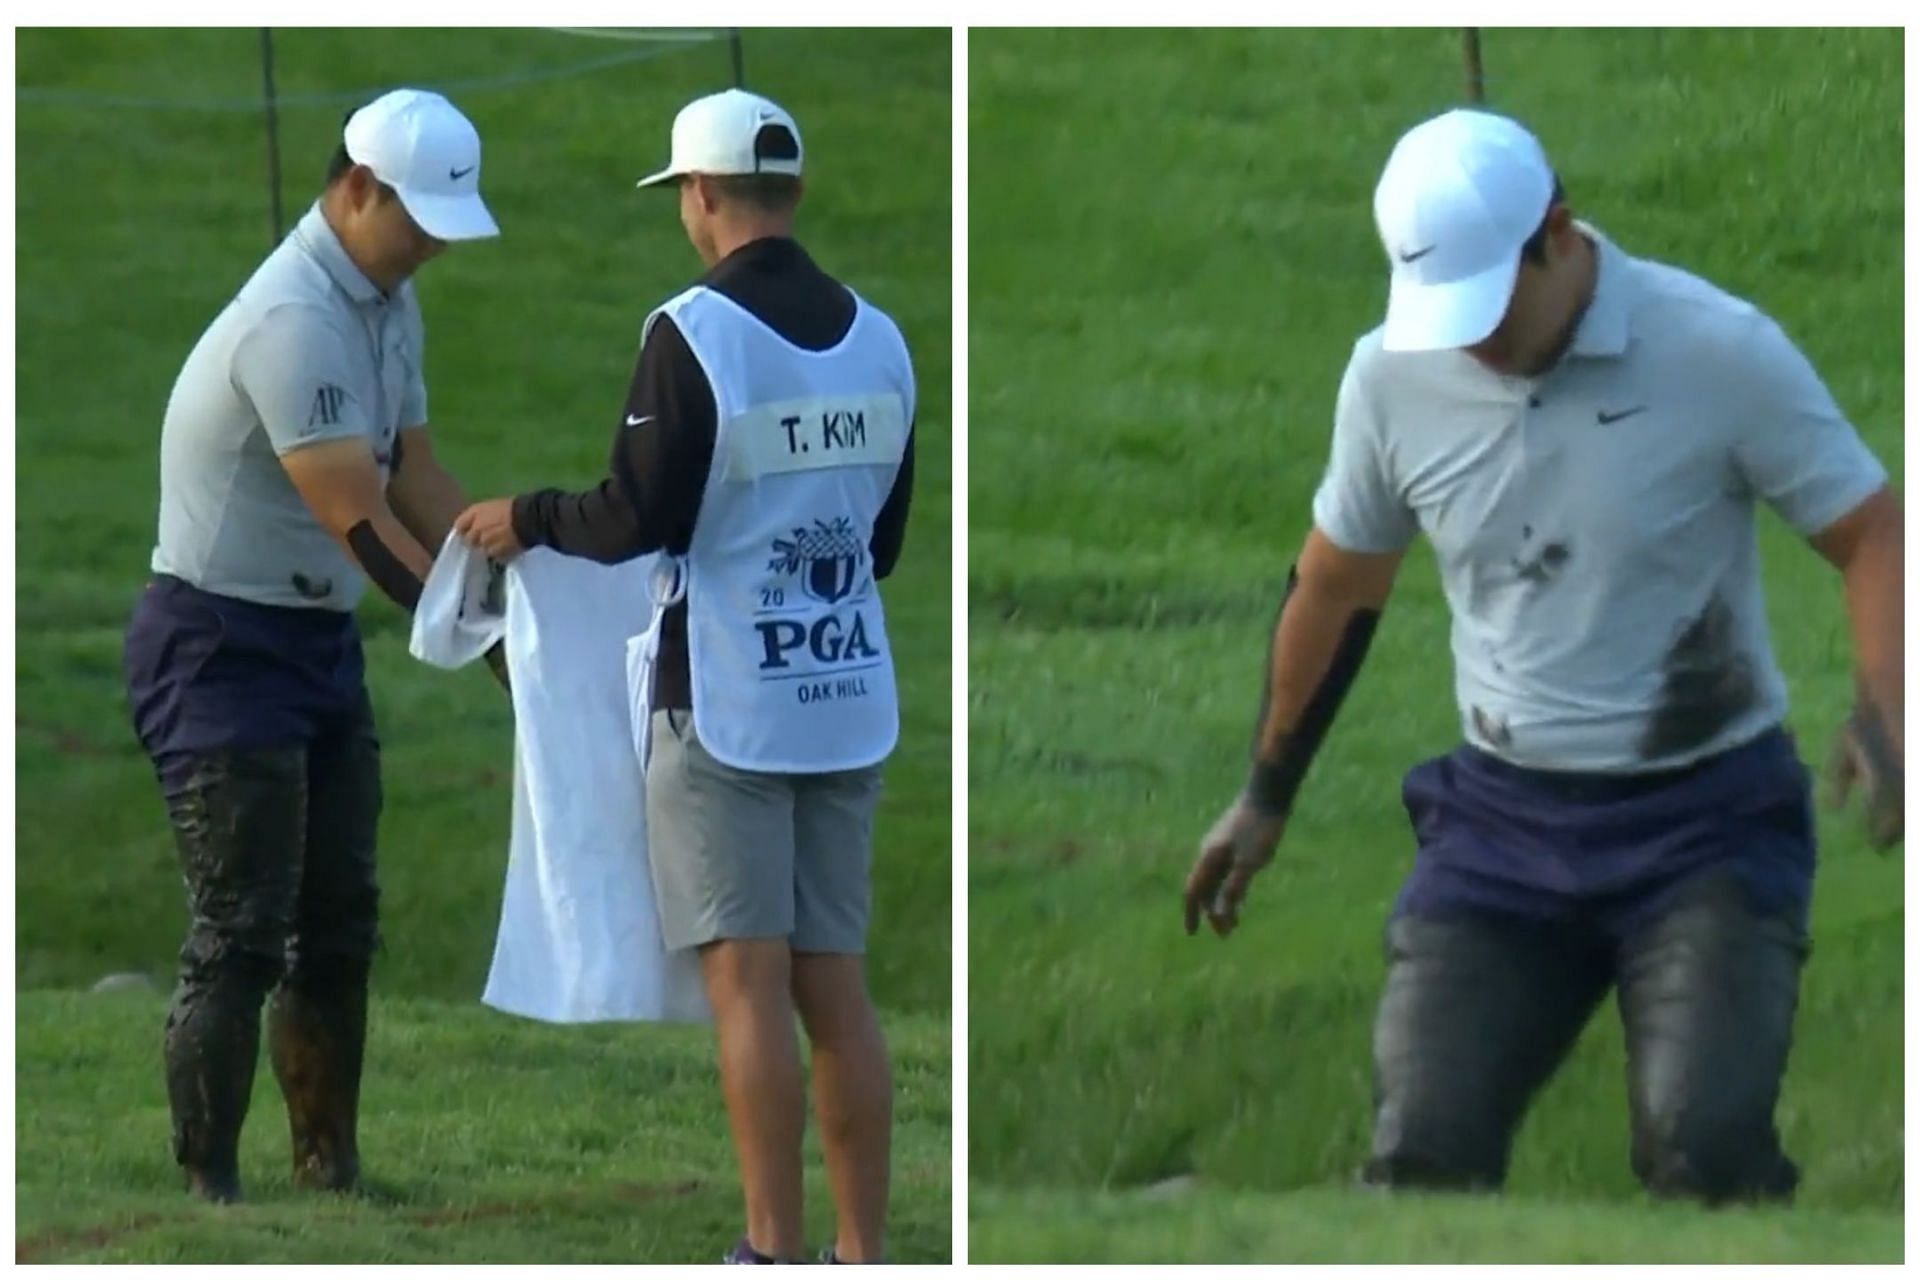 Tom Kim got into the mud to fin his ball at the 2023 PGA Championship